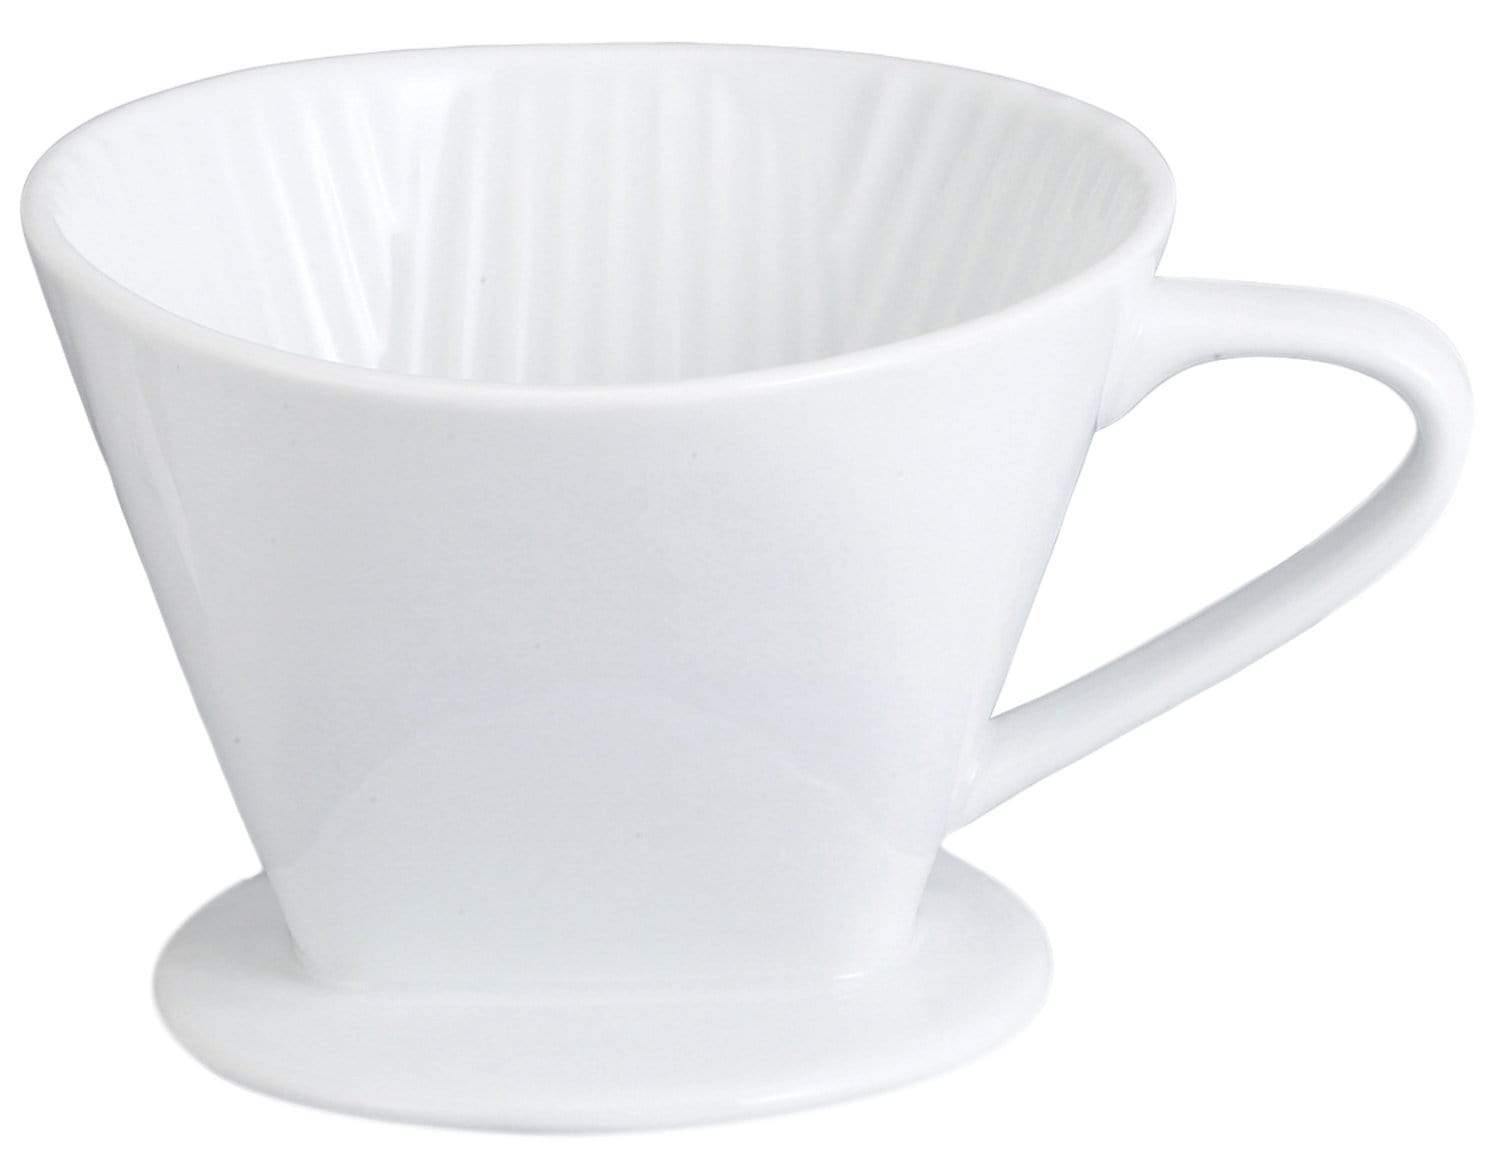 Kitchen & Company Pour Over #4 Porcelain Cone Filter Coffeemaker